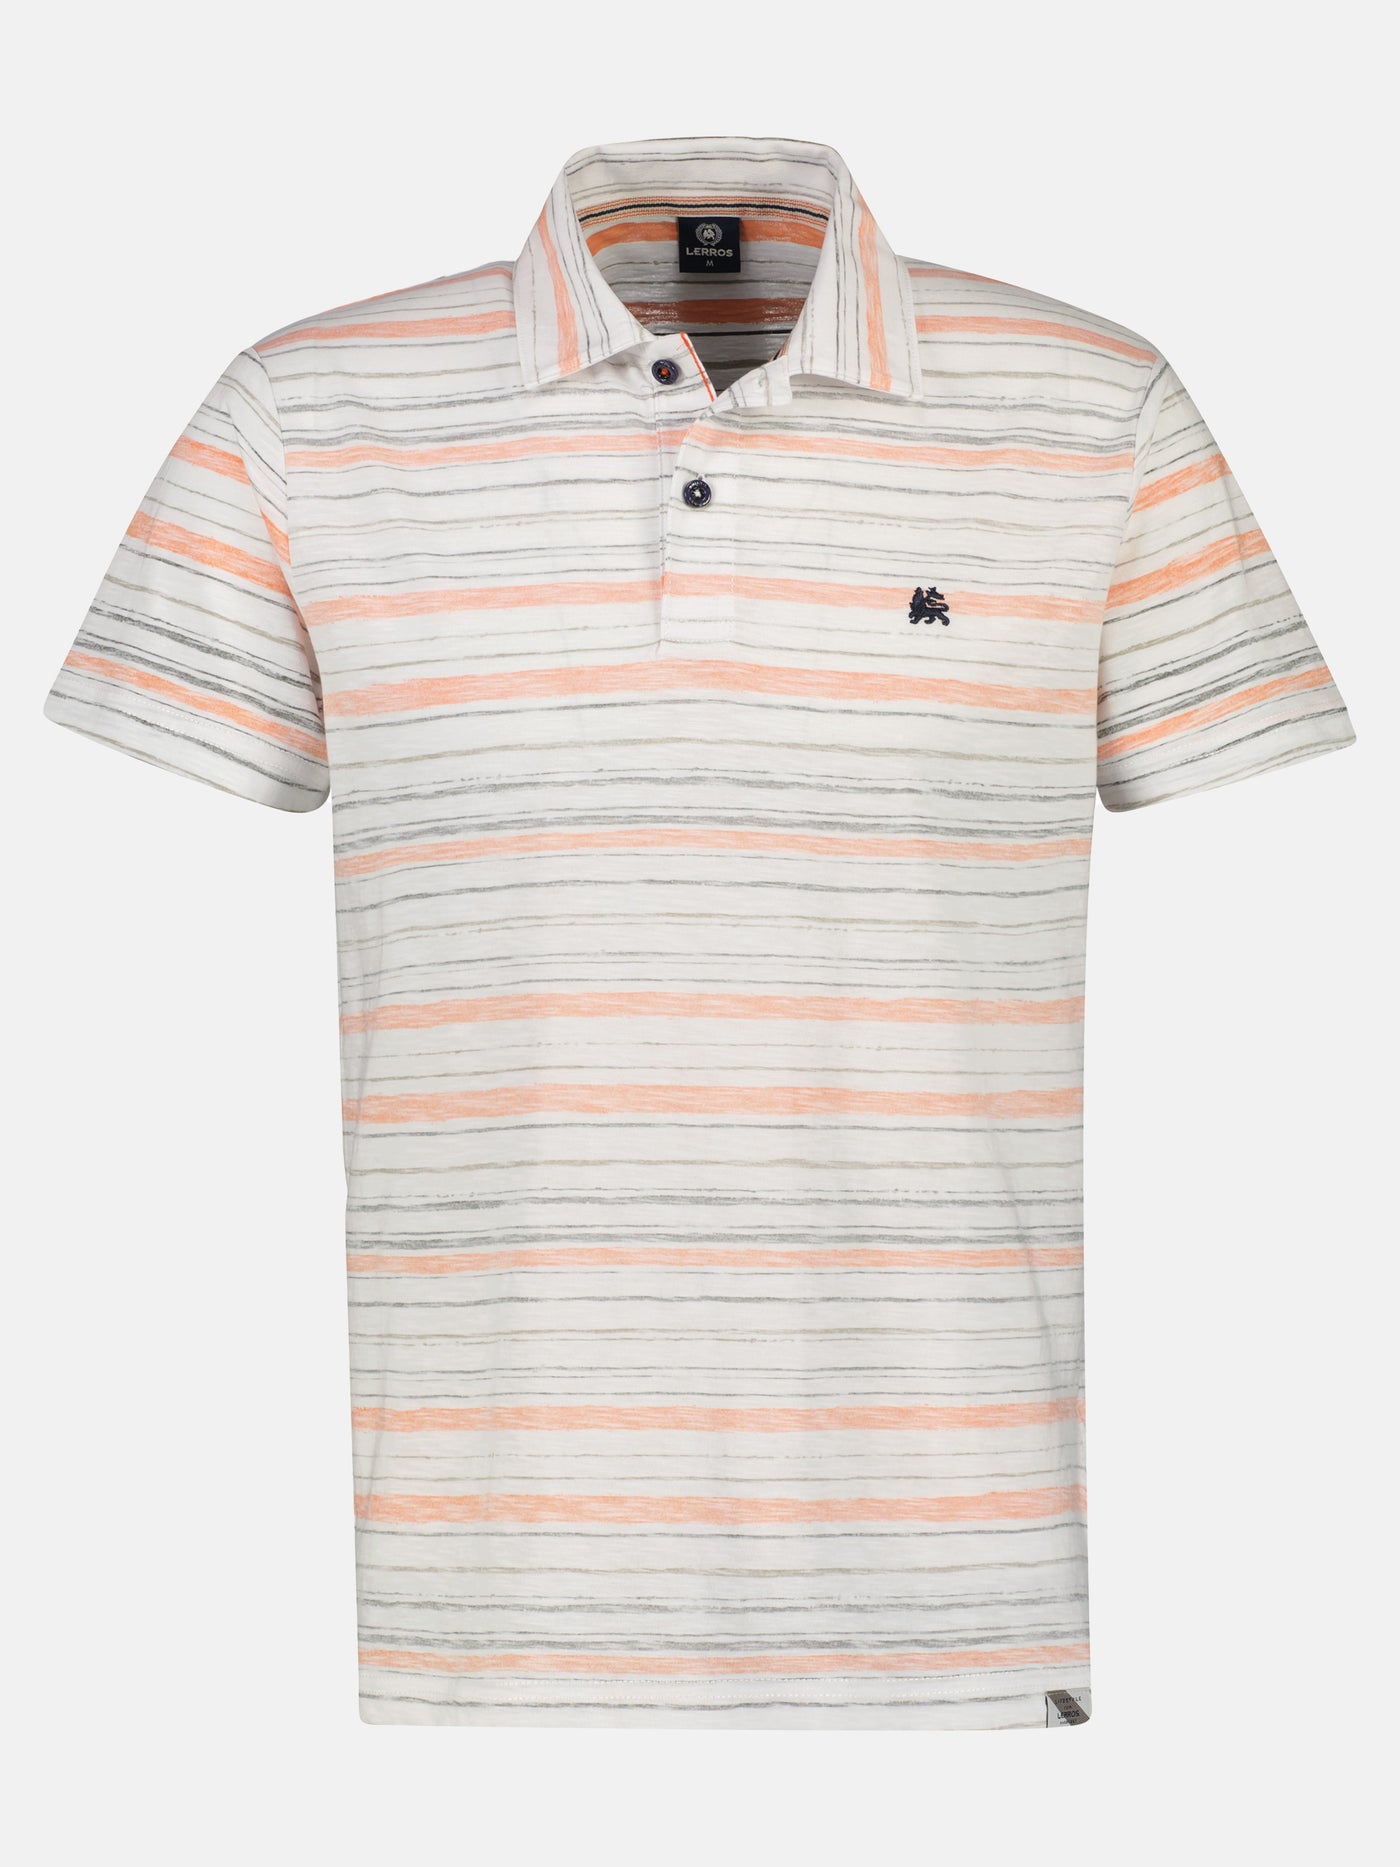 Classic polo with stripes